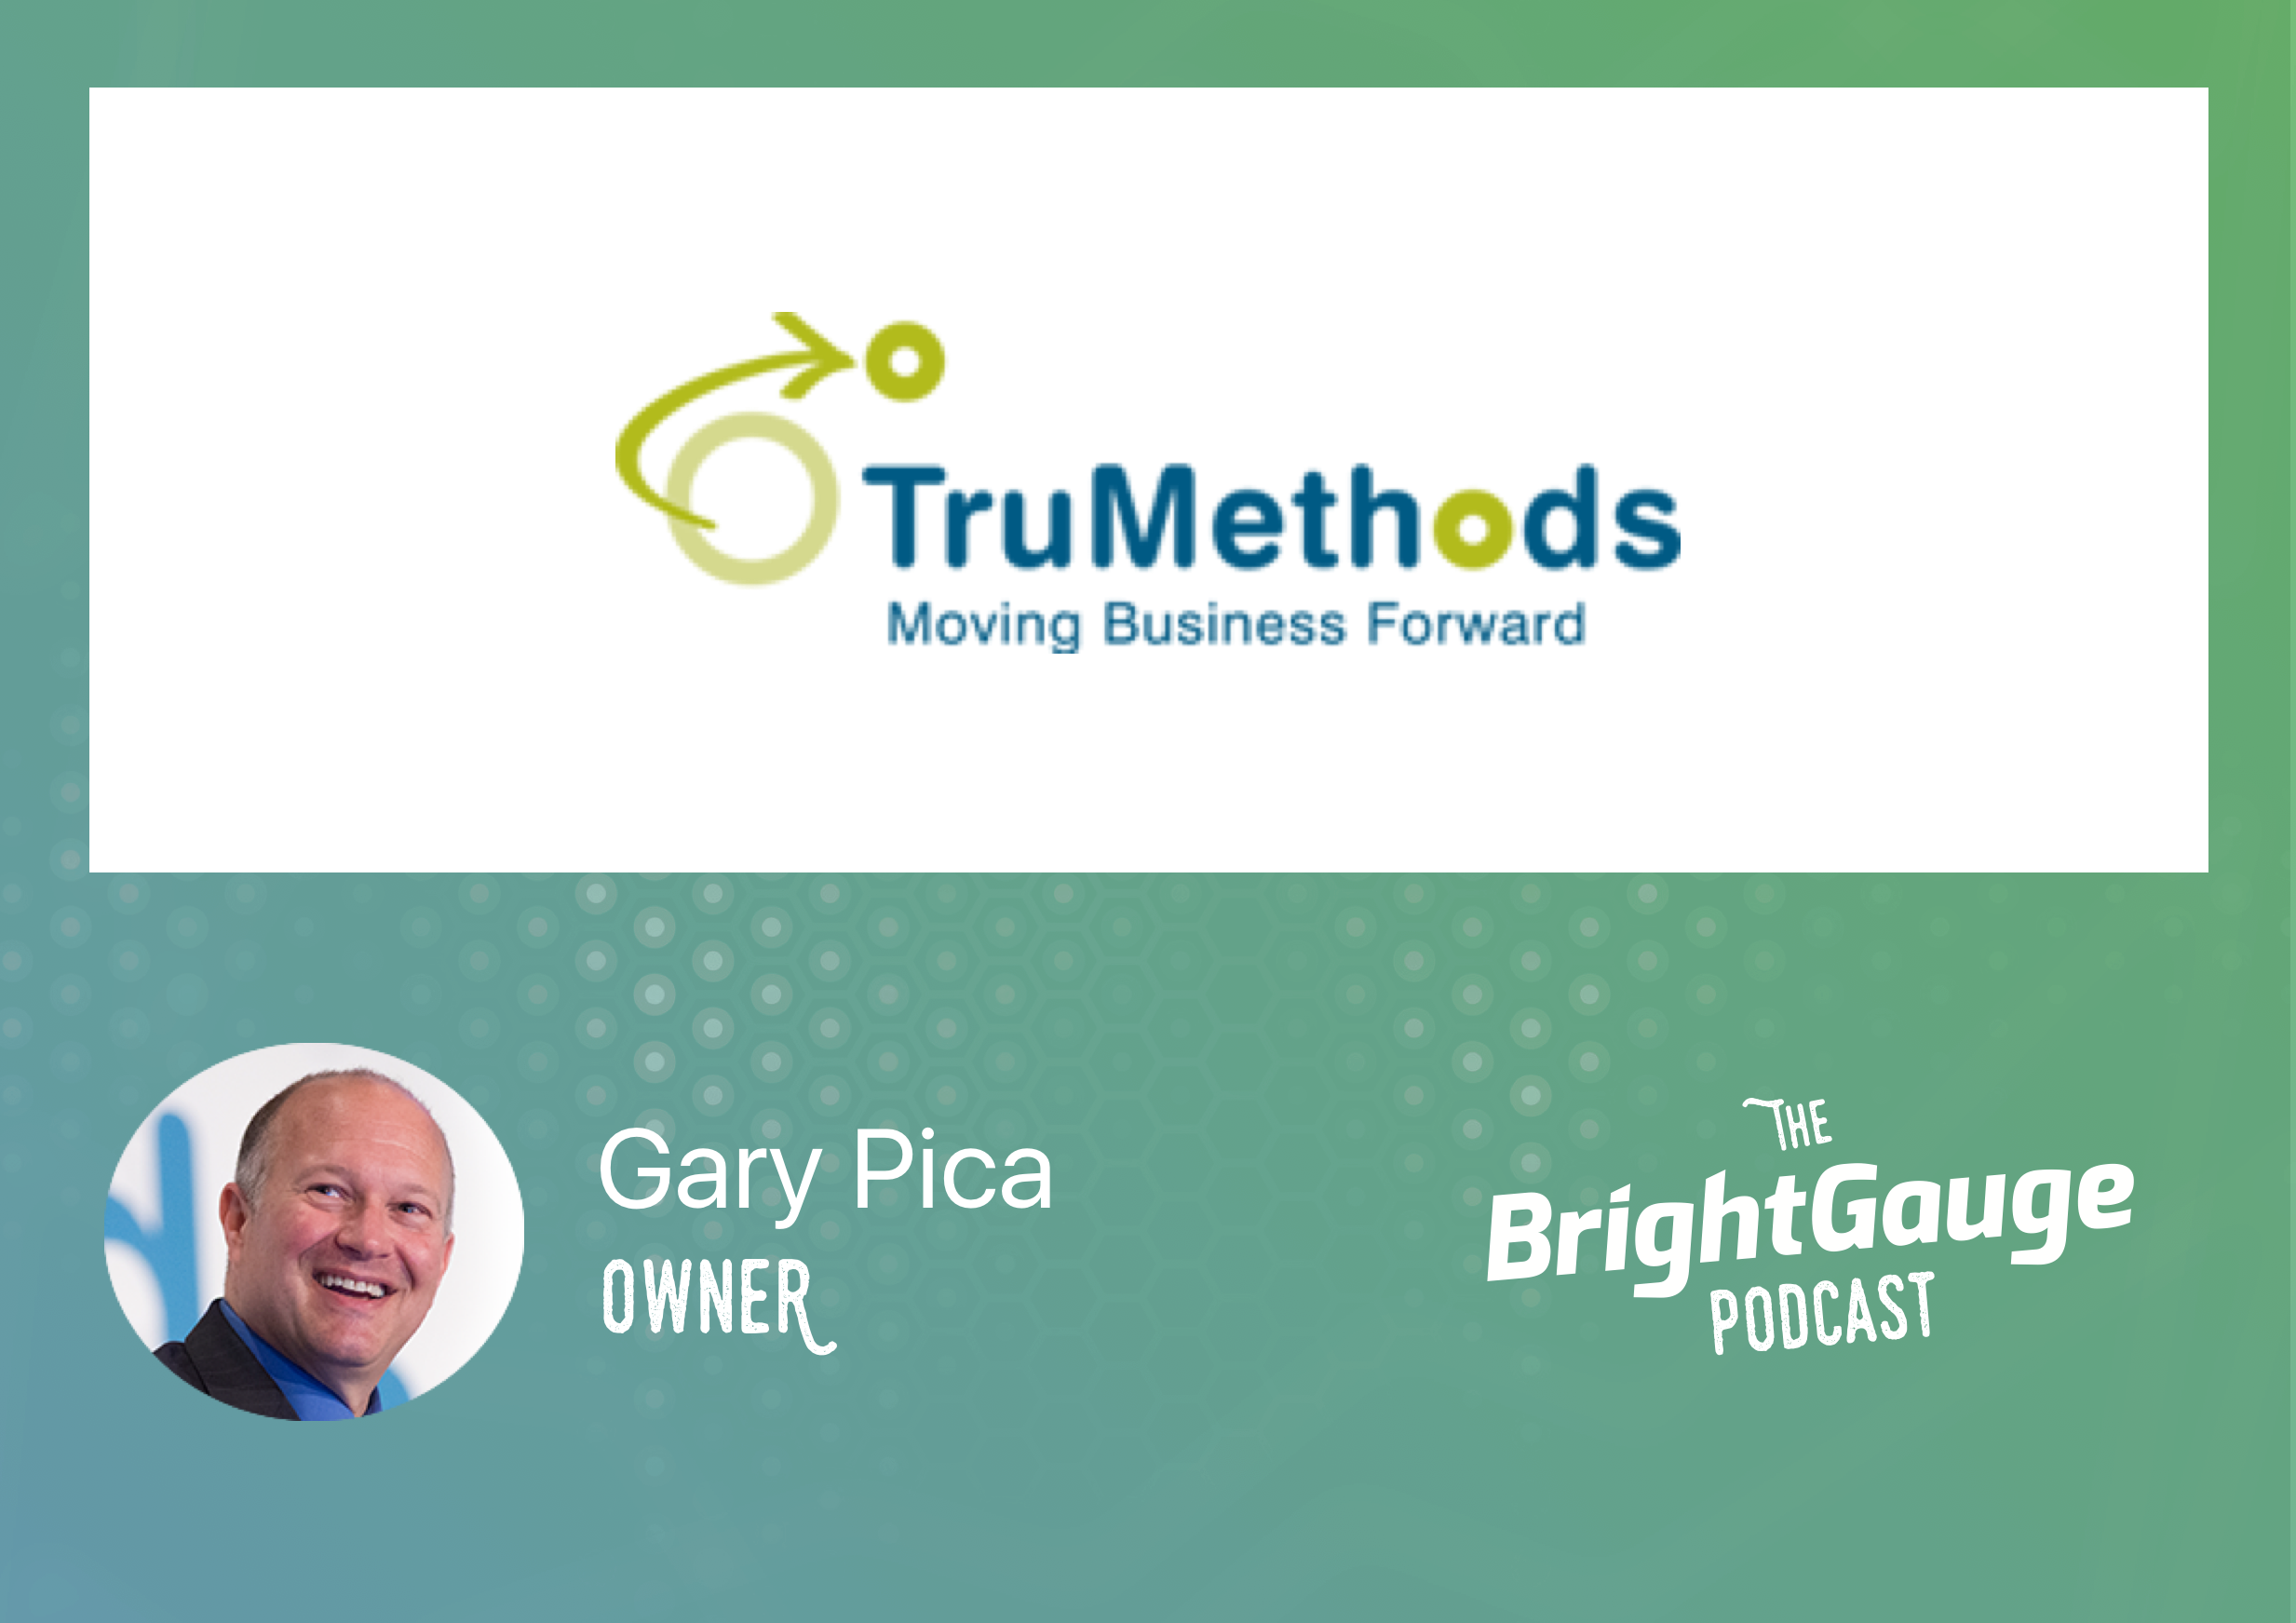 [Podcast] Insights from MSP Coach and Expert, Gary Pica